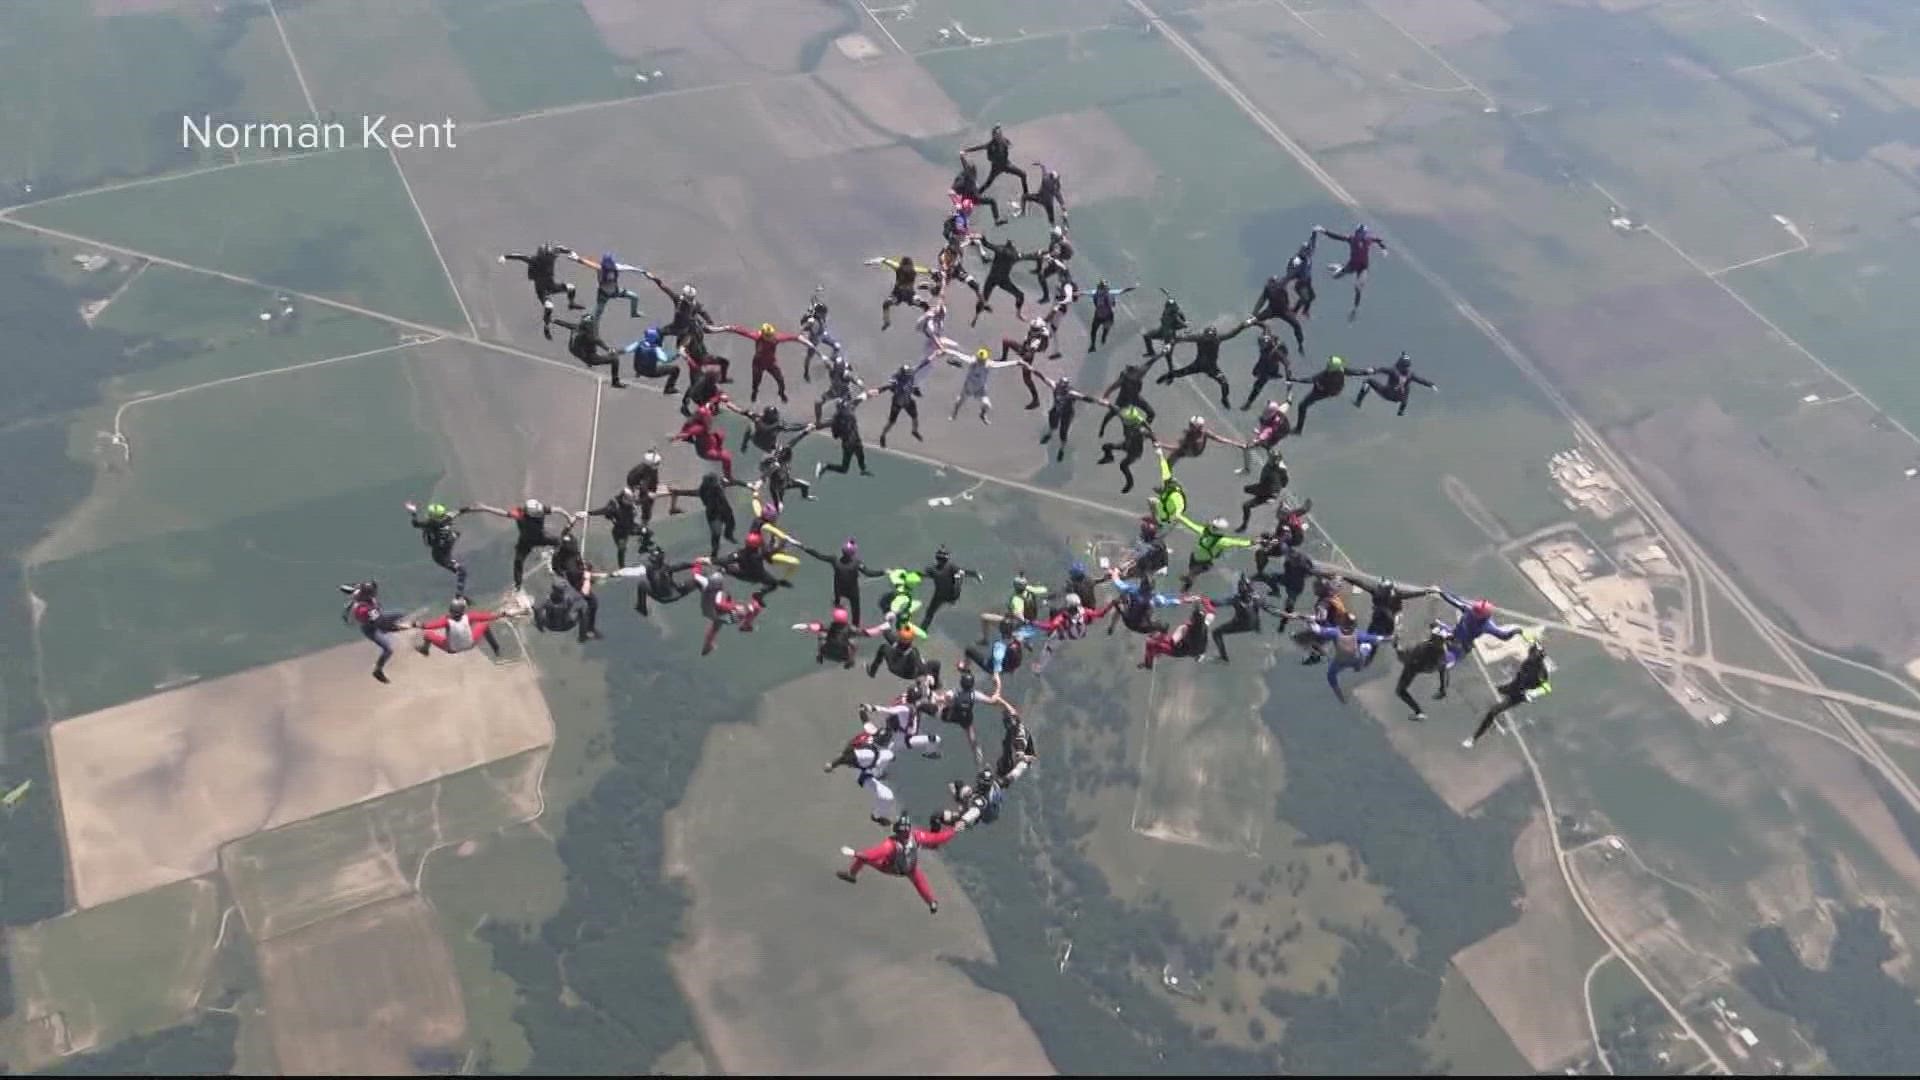 Five planes and 84 skydivers were involved in breaking the record.